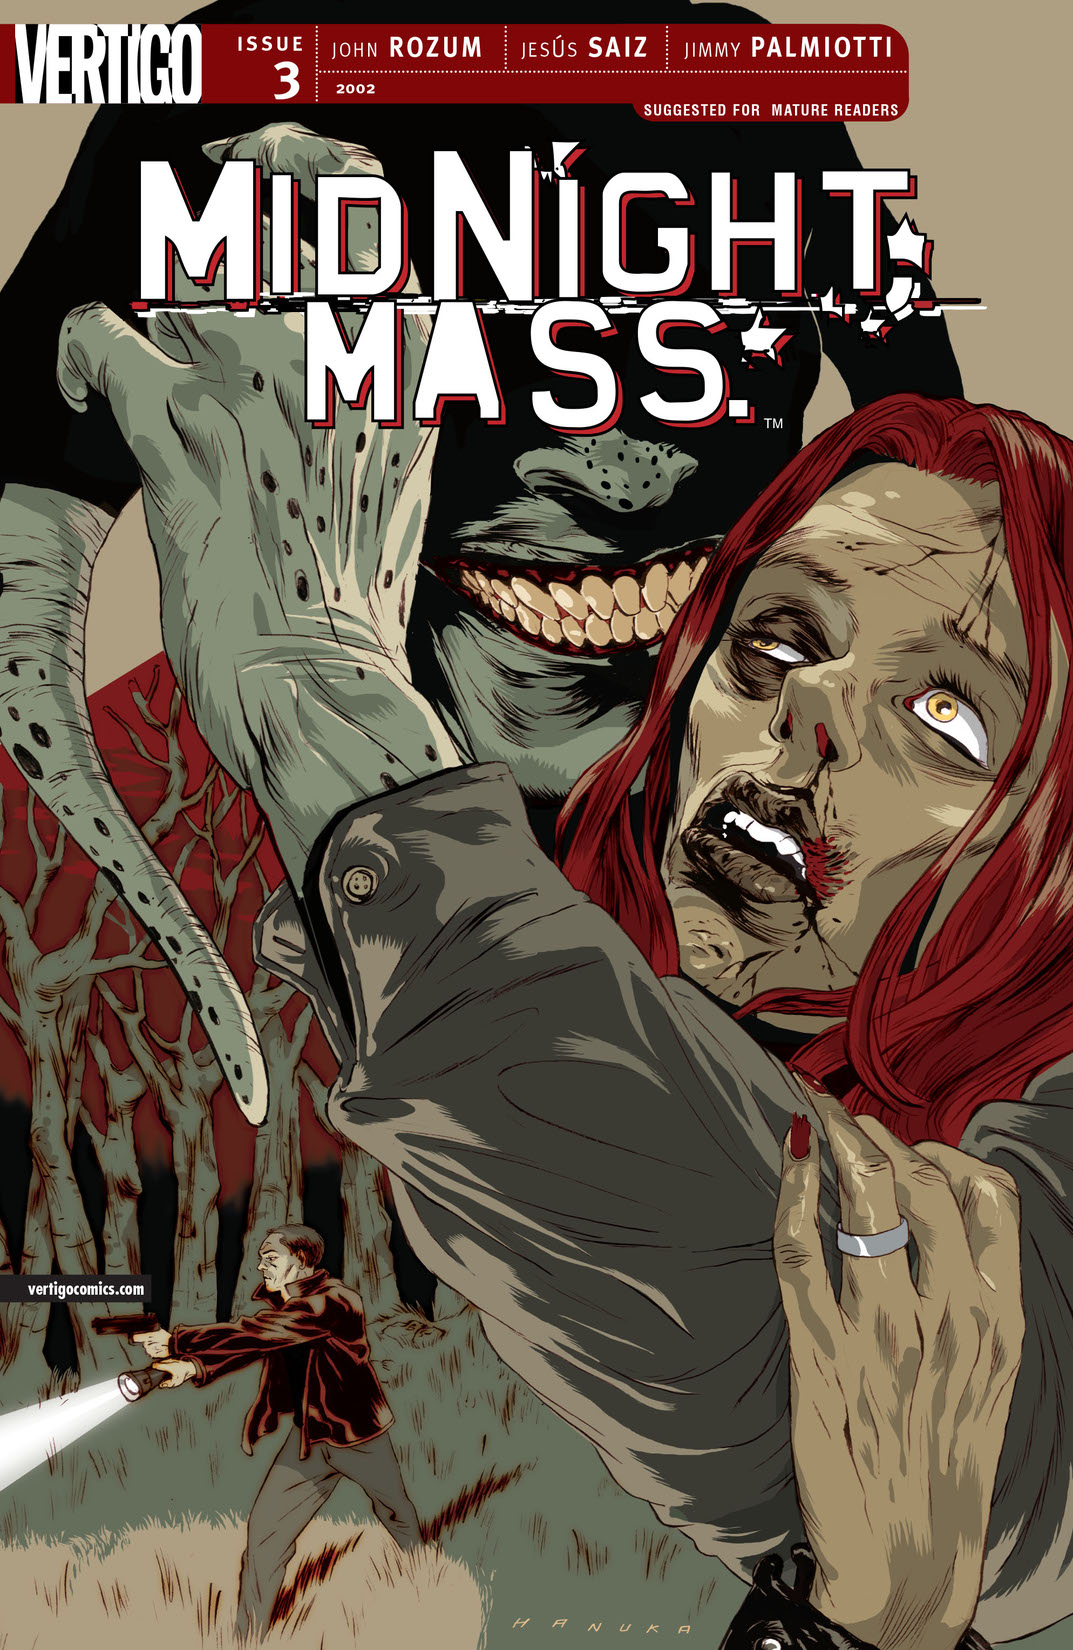 Midnight, Mass #3 preview images